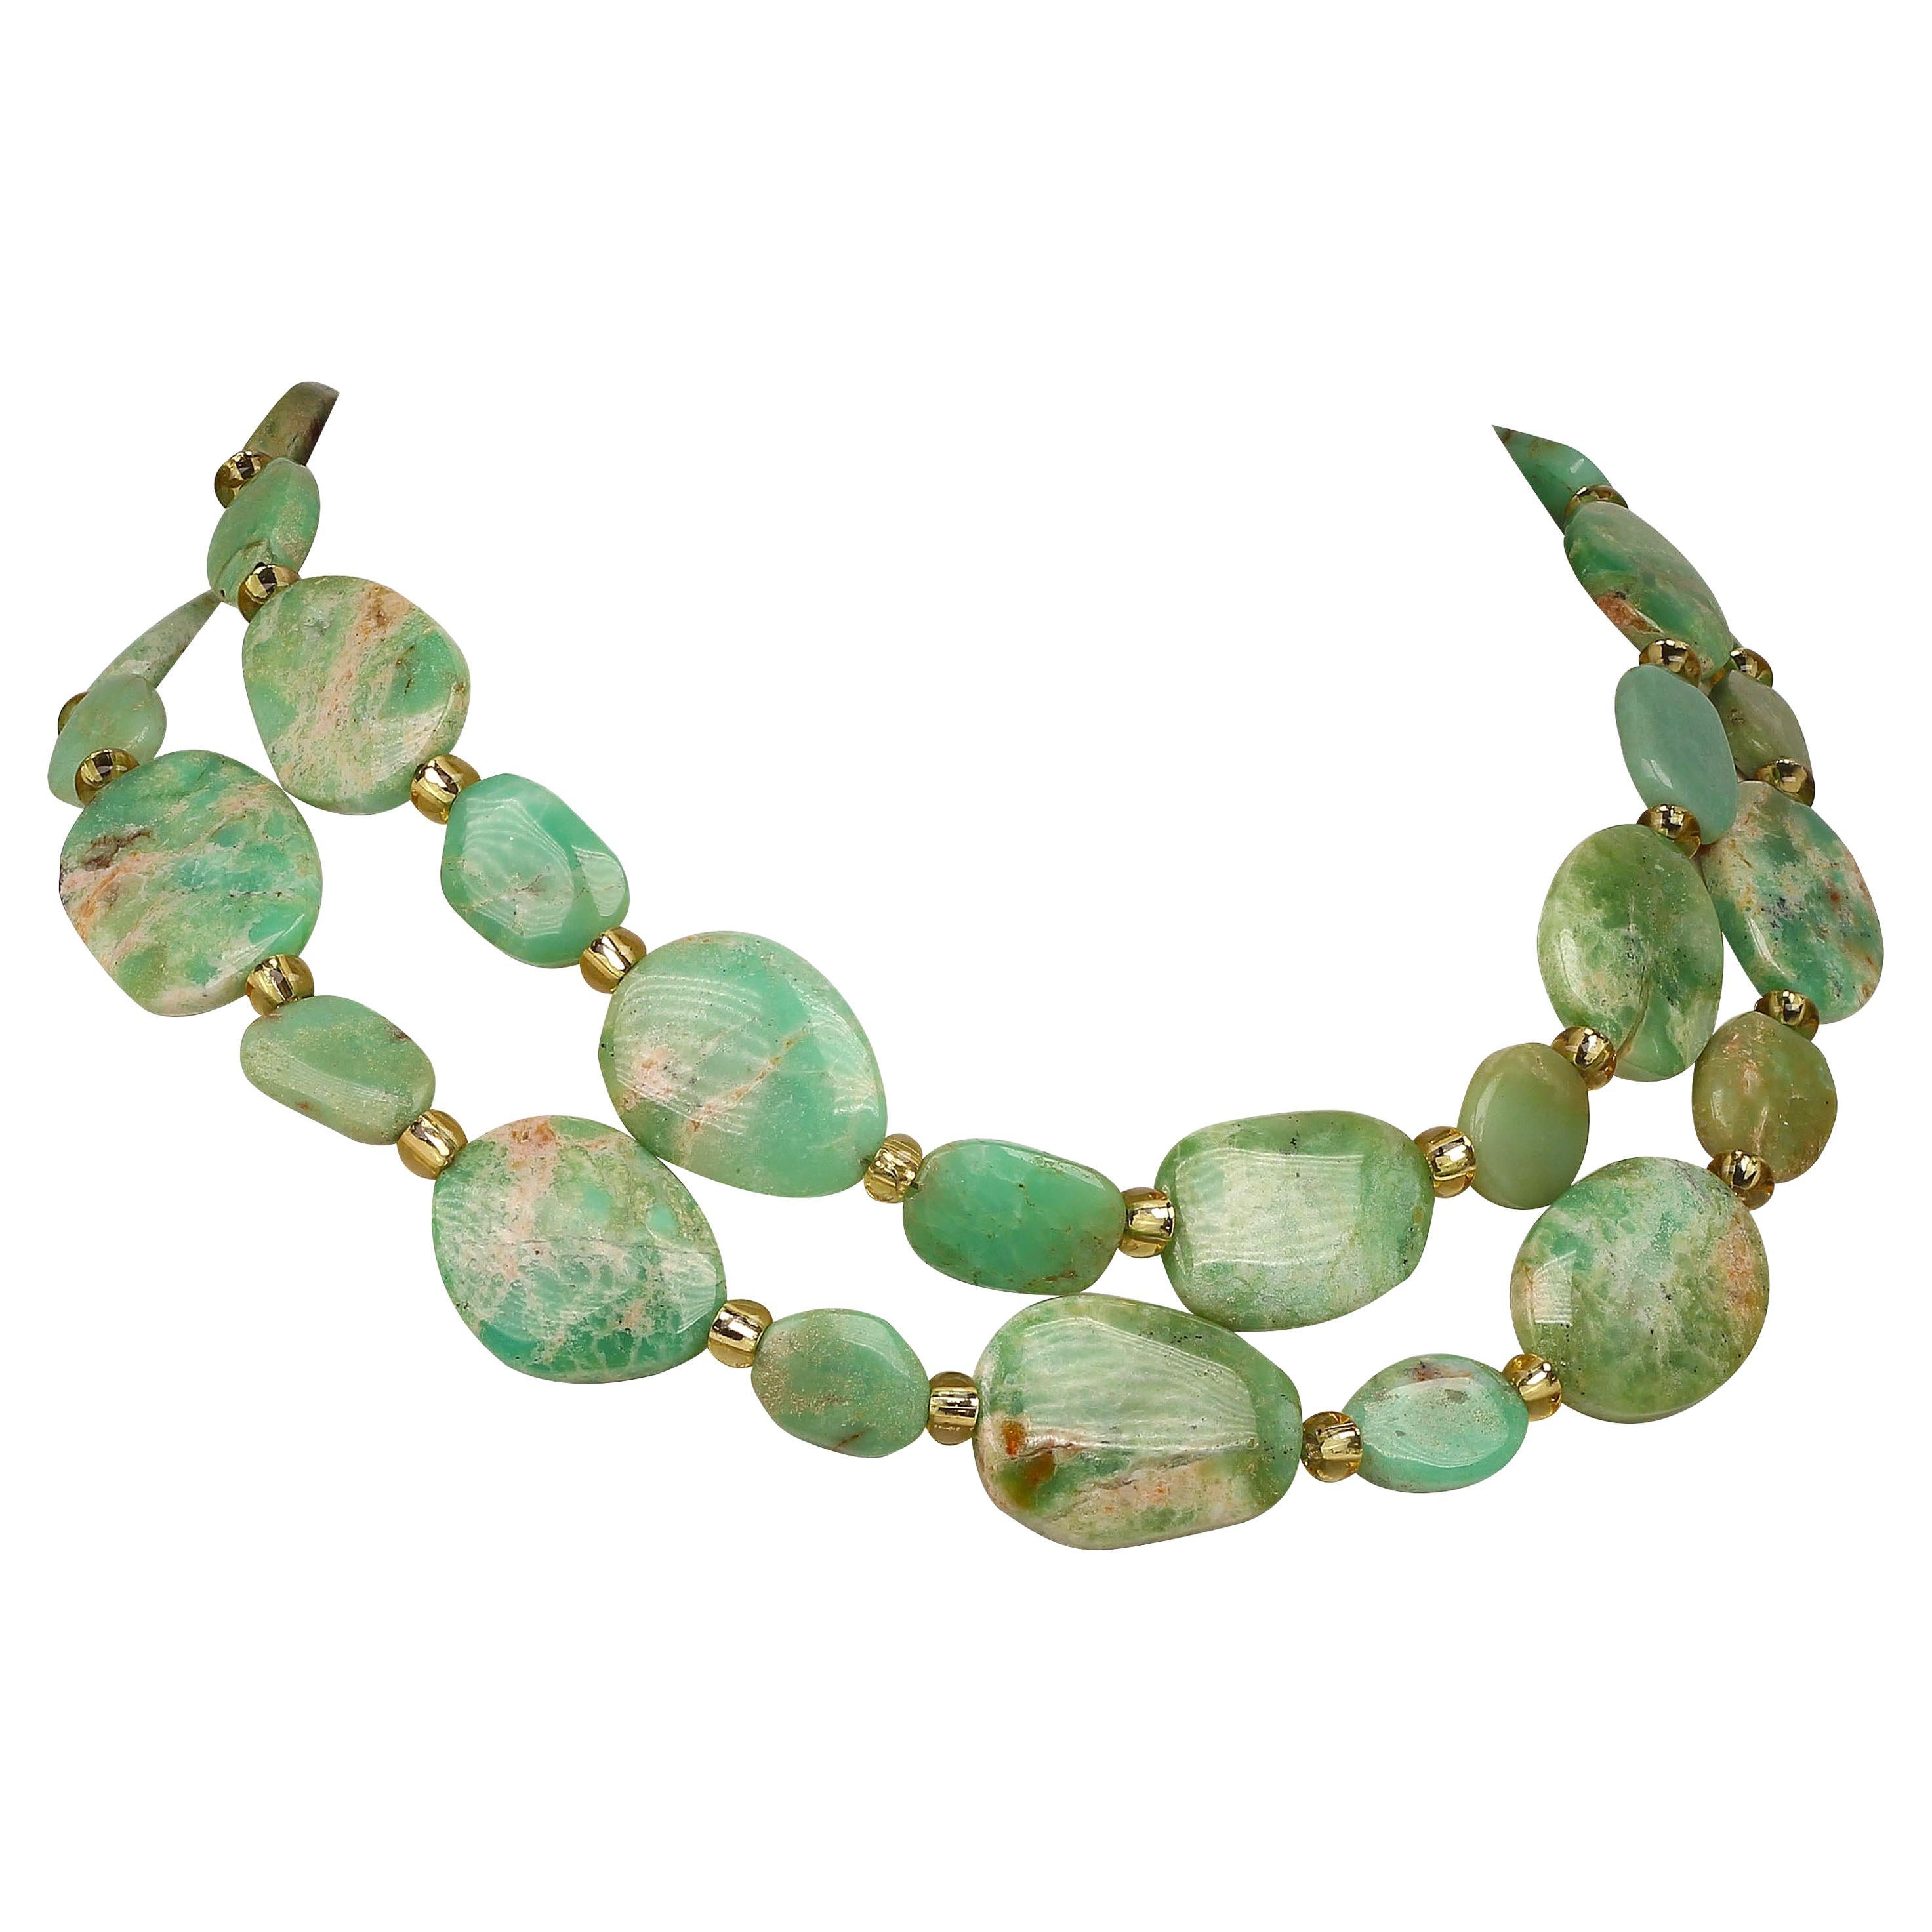  Two-Strand Necklace of Flat Polished Chrysoprase Uneven Pieces